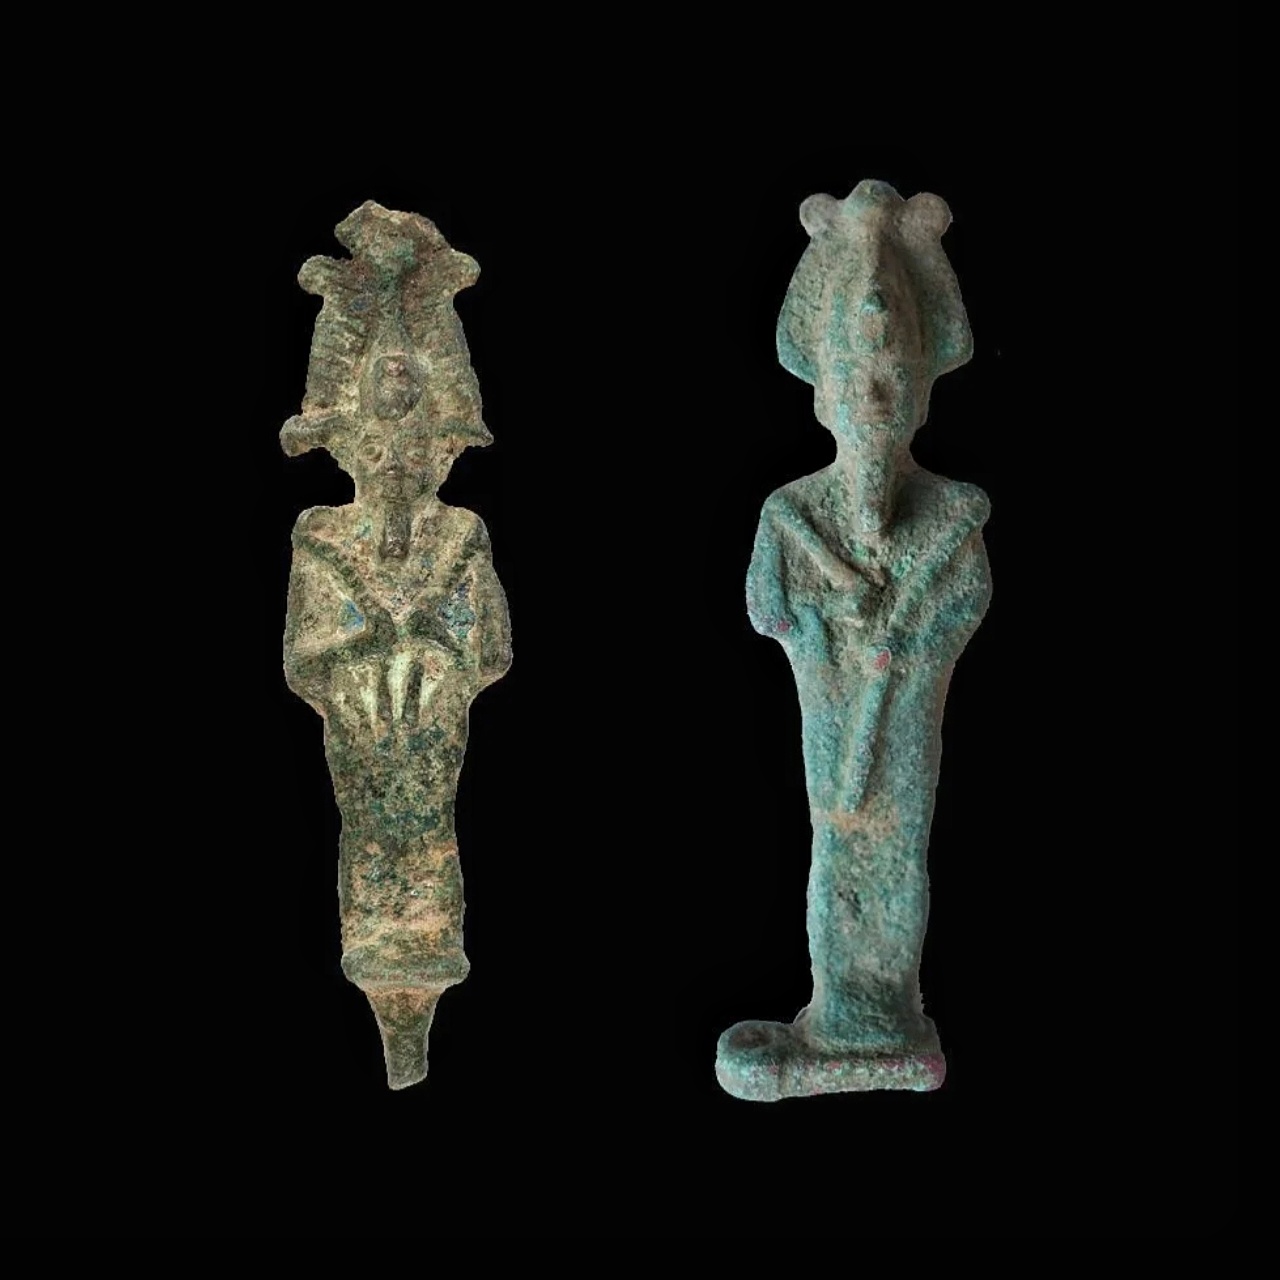 Ancient Egyptian figurines depicting Osiris found in Poland 1